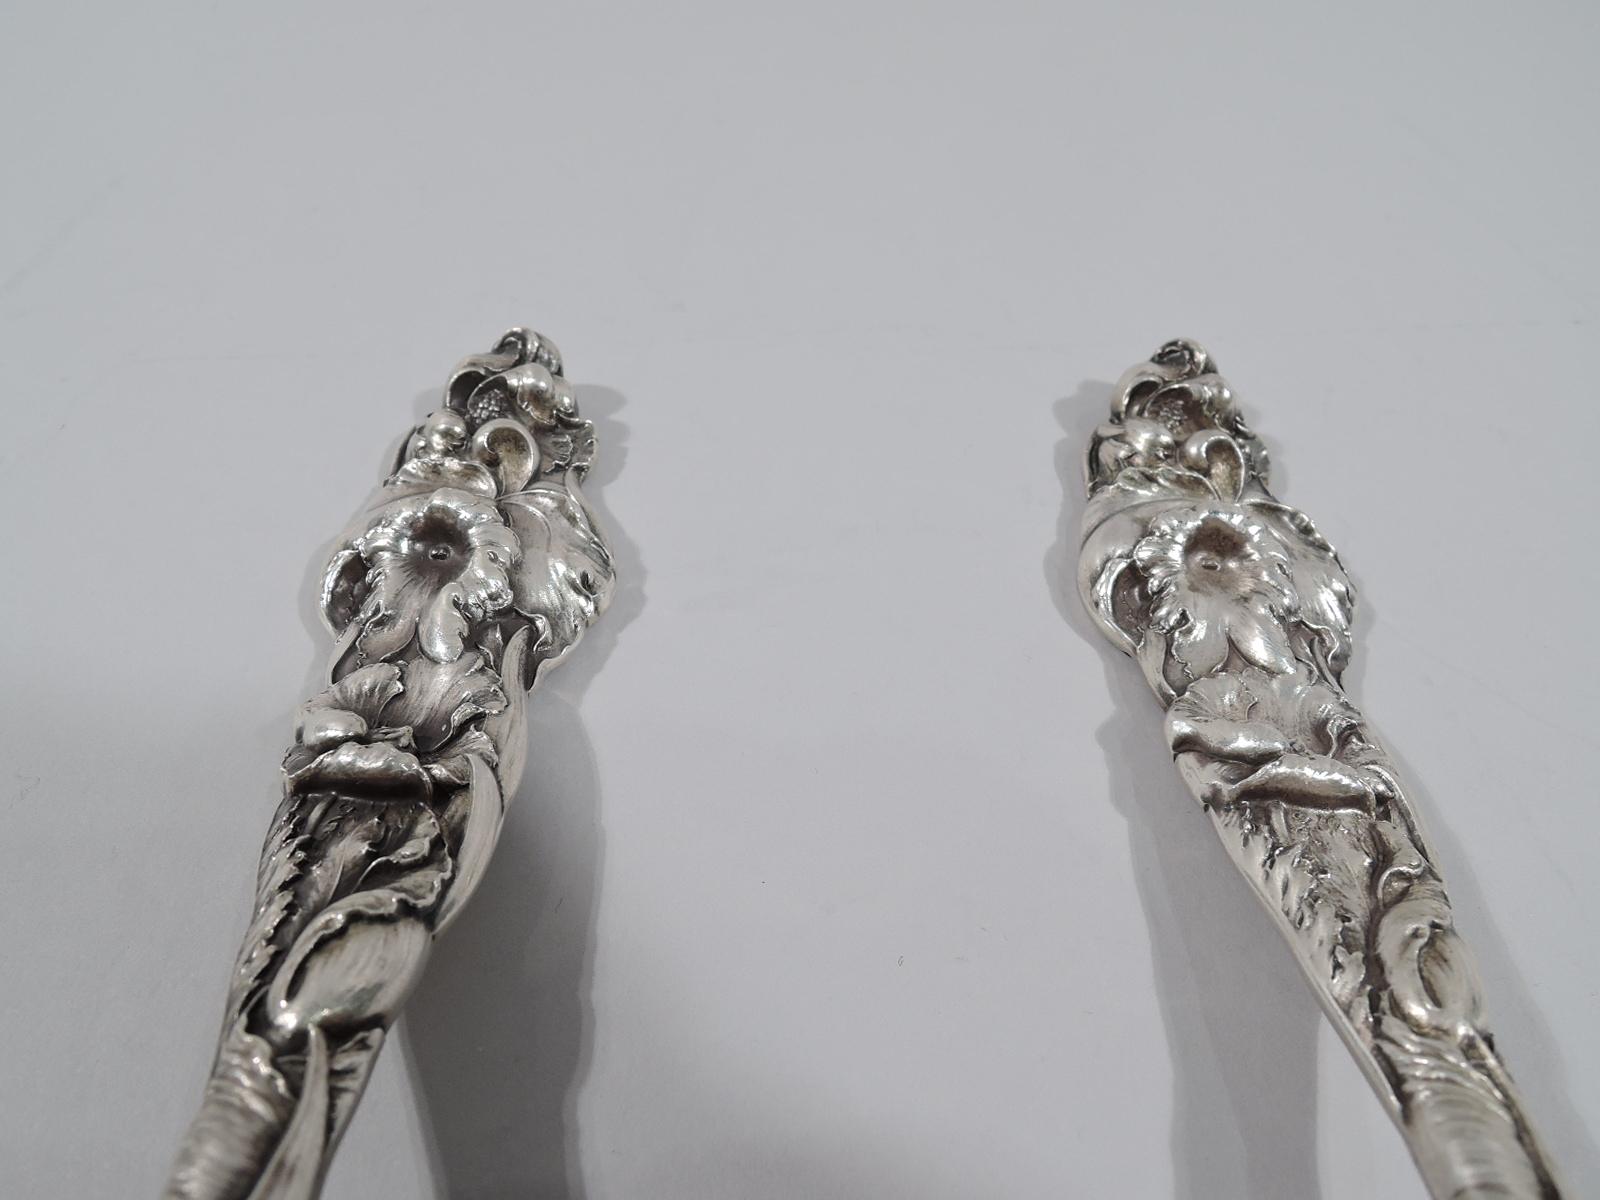 Turn-of-the-century Six Fleurs sterling silver salad serving, pair. Made by Reed & Barton in Taunton, Mass. This pair comprises spoon and fork. Each: cast handle comprising dense and overlapping flowers and leaves. On back strewn flowers and leaves.